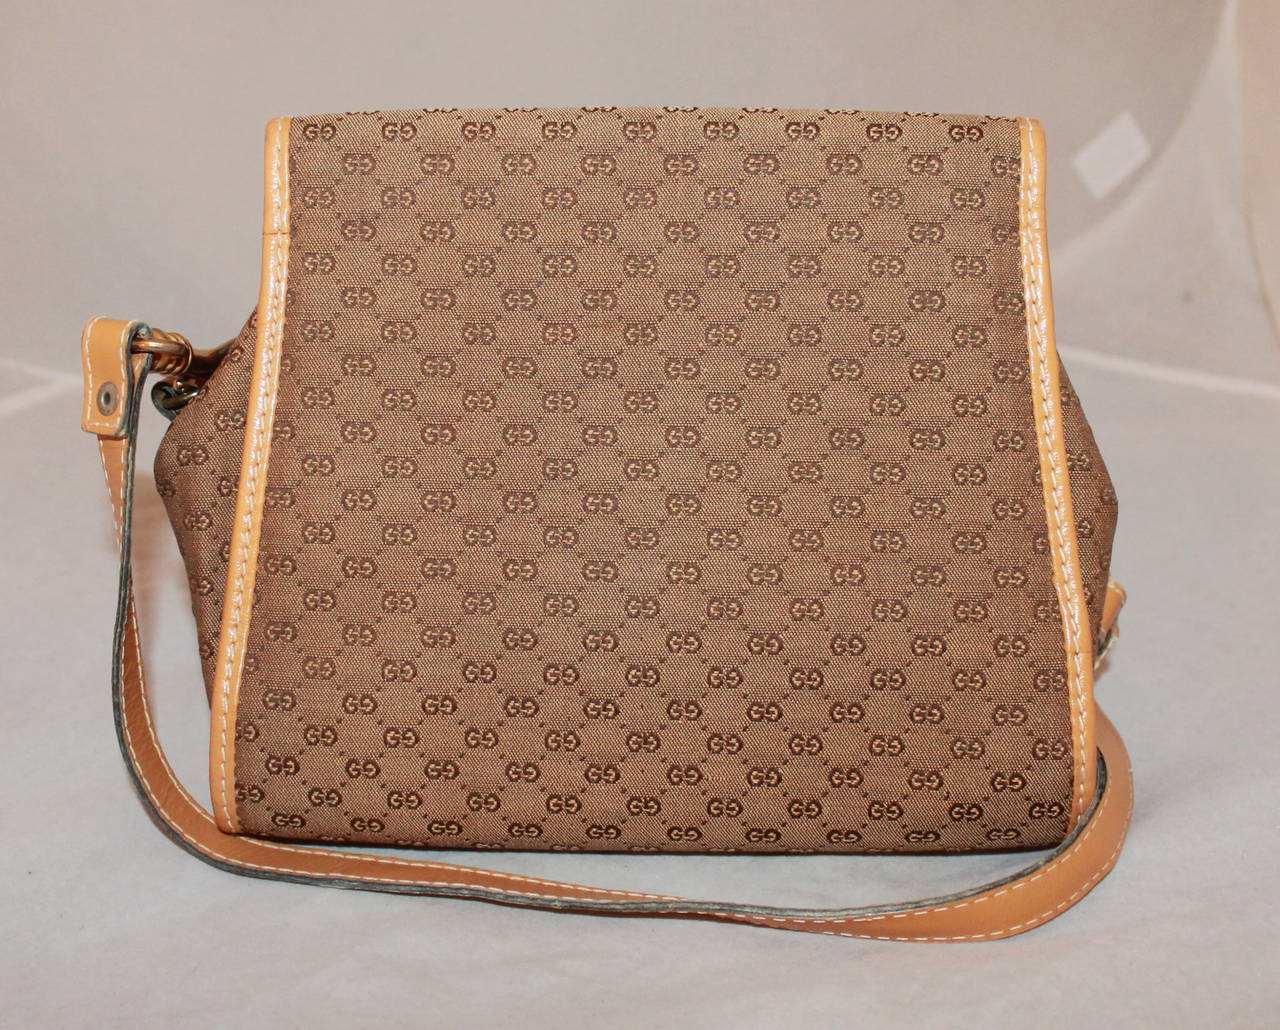 Gucci Vintage Monogram Handbag with Strap. This handbag is in excellent condition and comes with a duster.

Measurements:
Length- 7